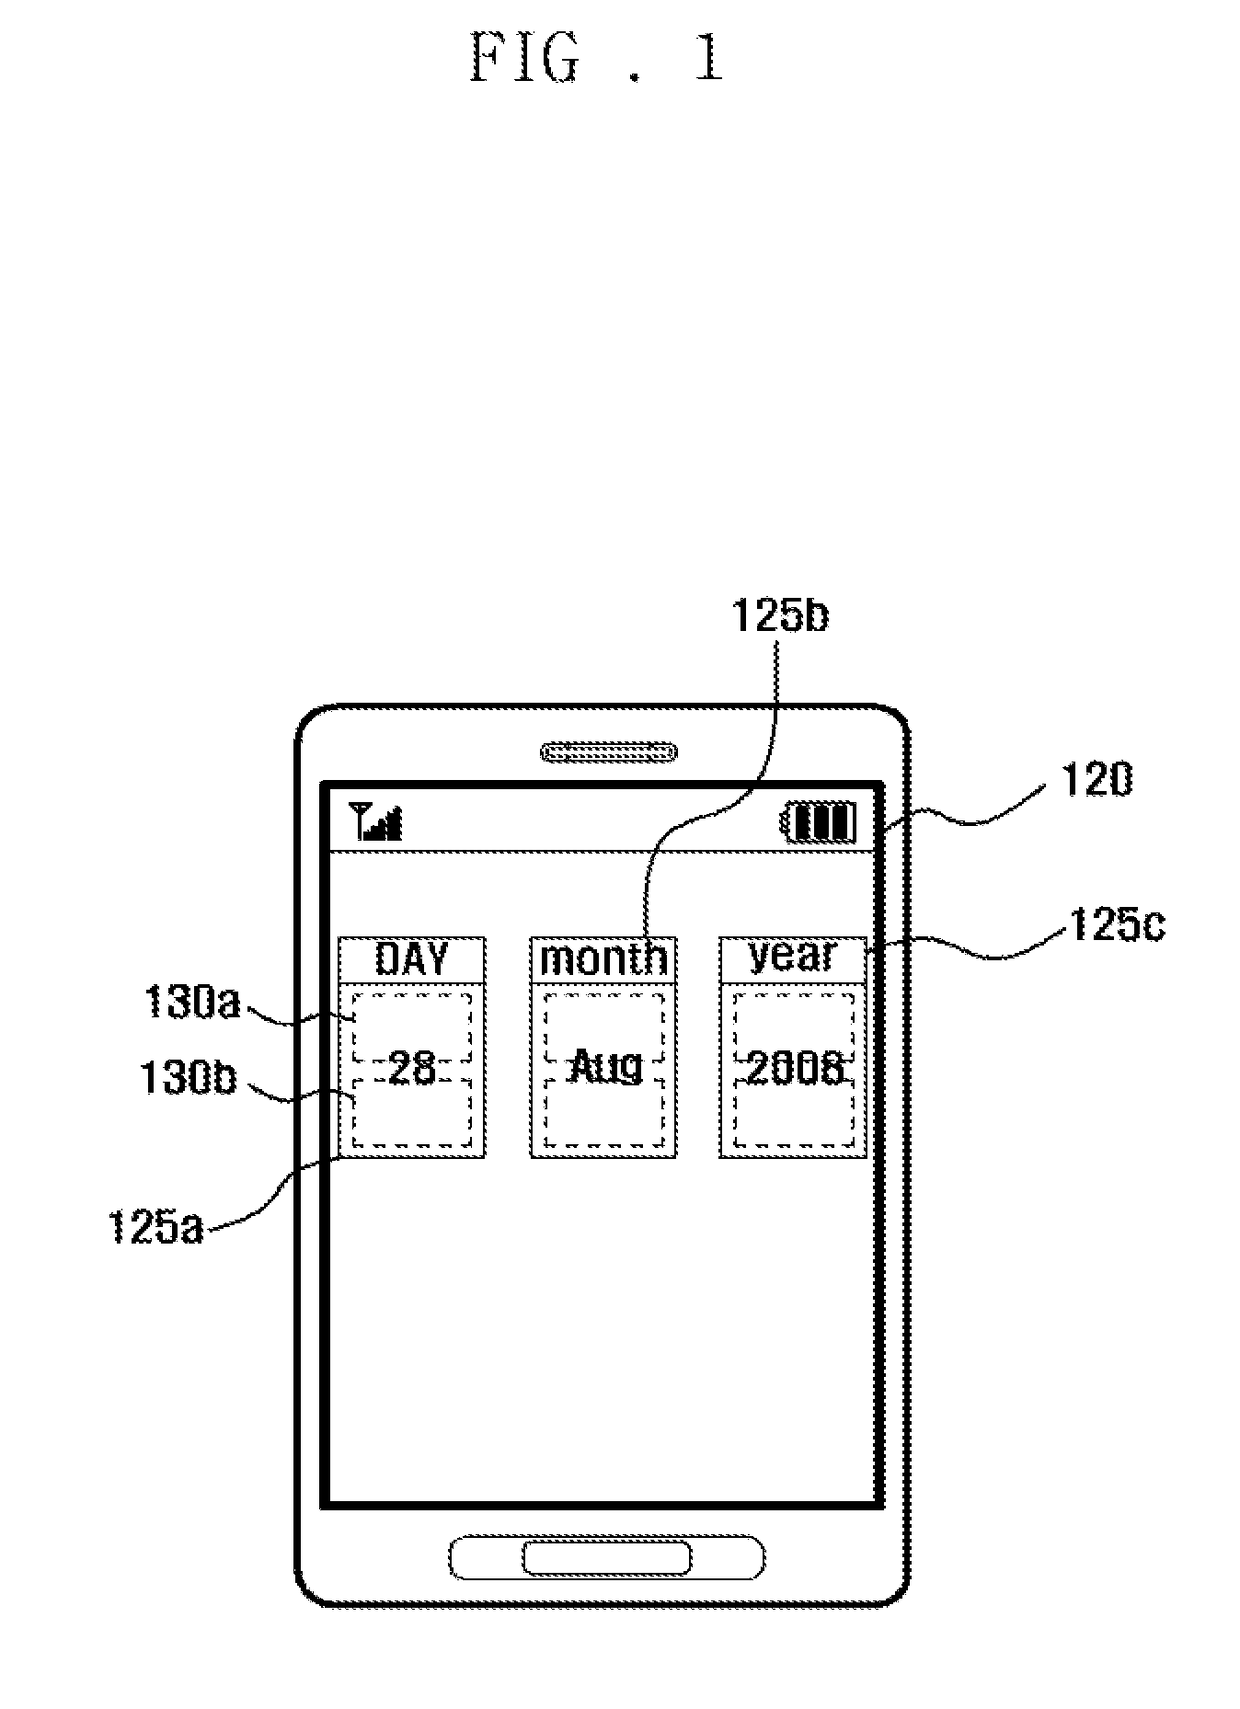 Electronic device having touch screen and method for changing data displayed on the touch screen